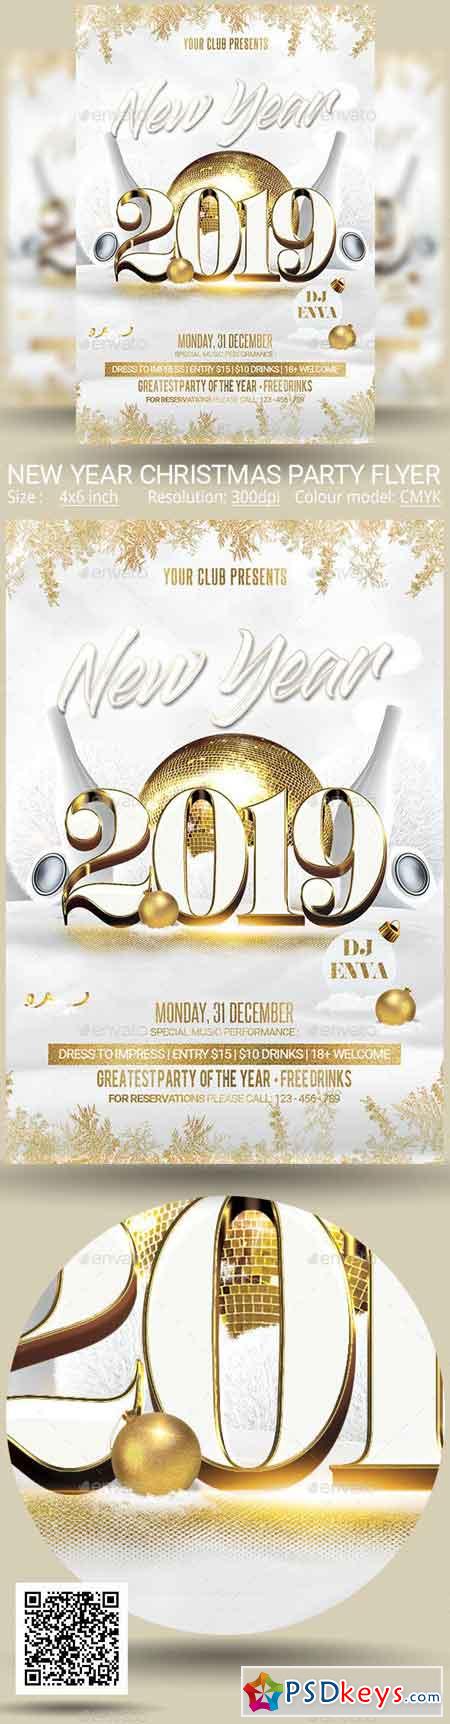 New Year Christmas Party Flyer 22992449